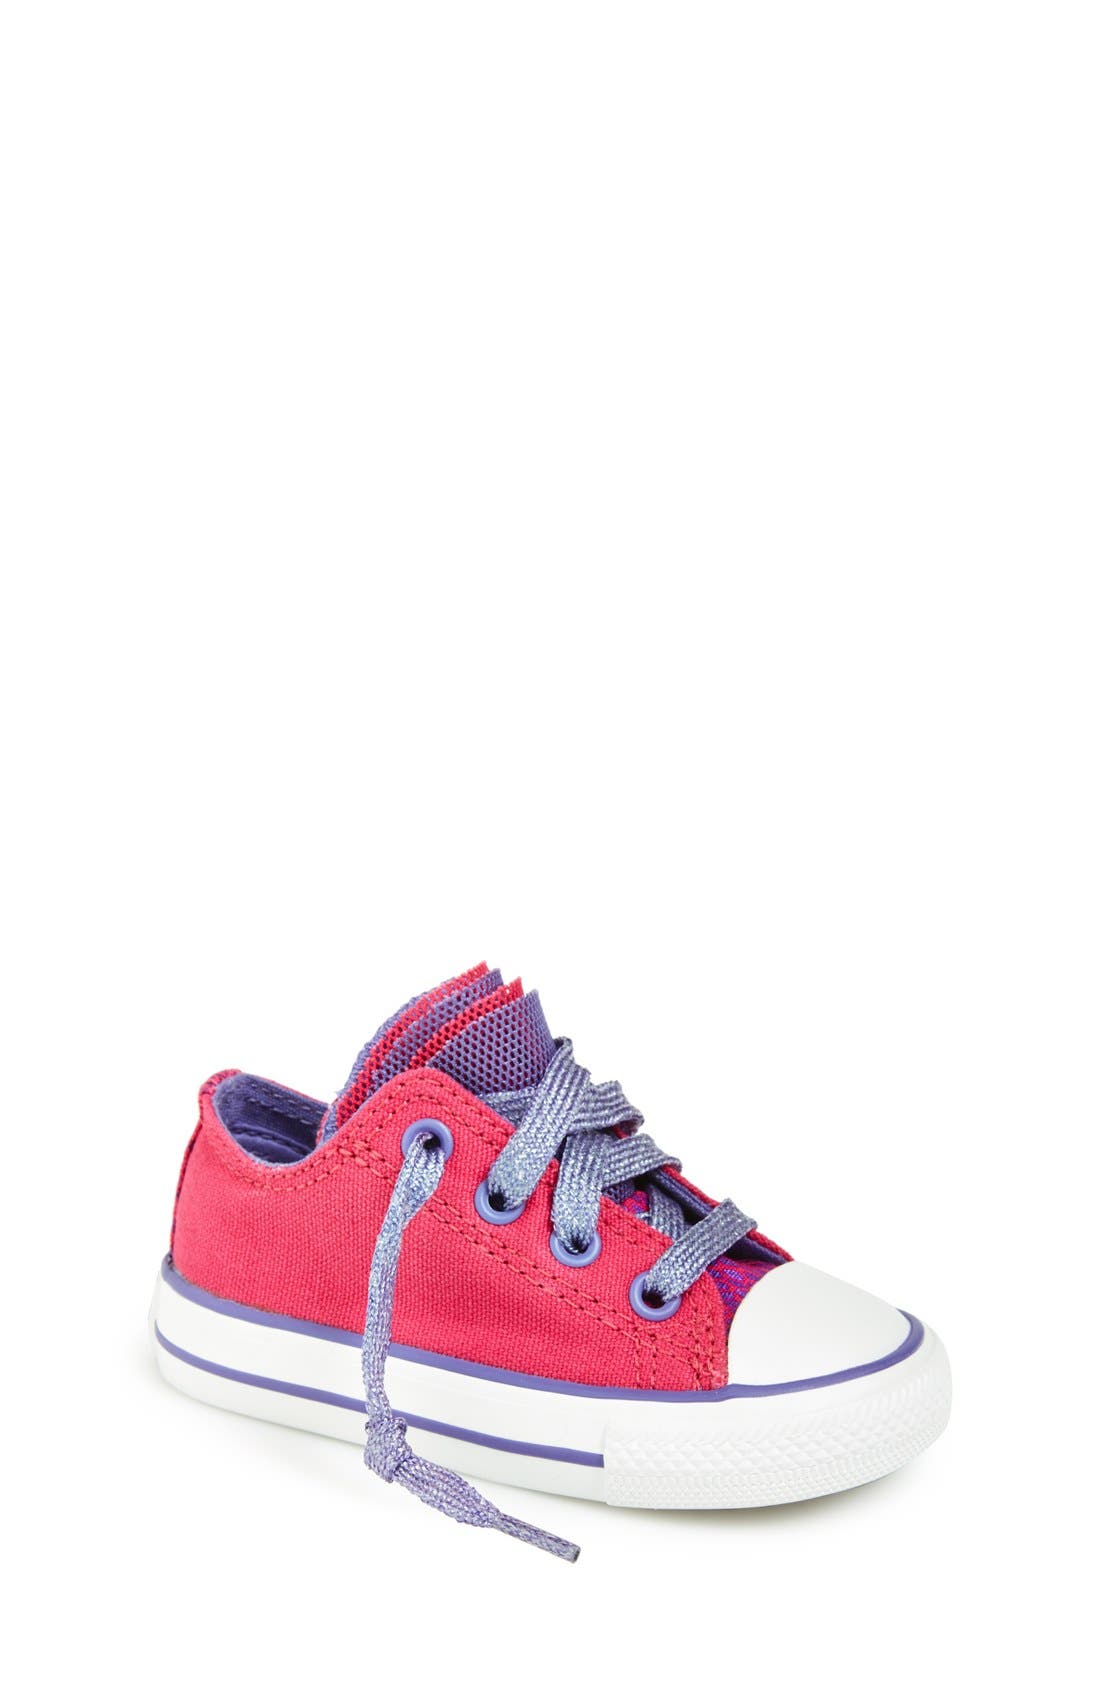 converse chuck taylor all star party dress low top